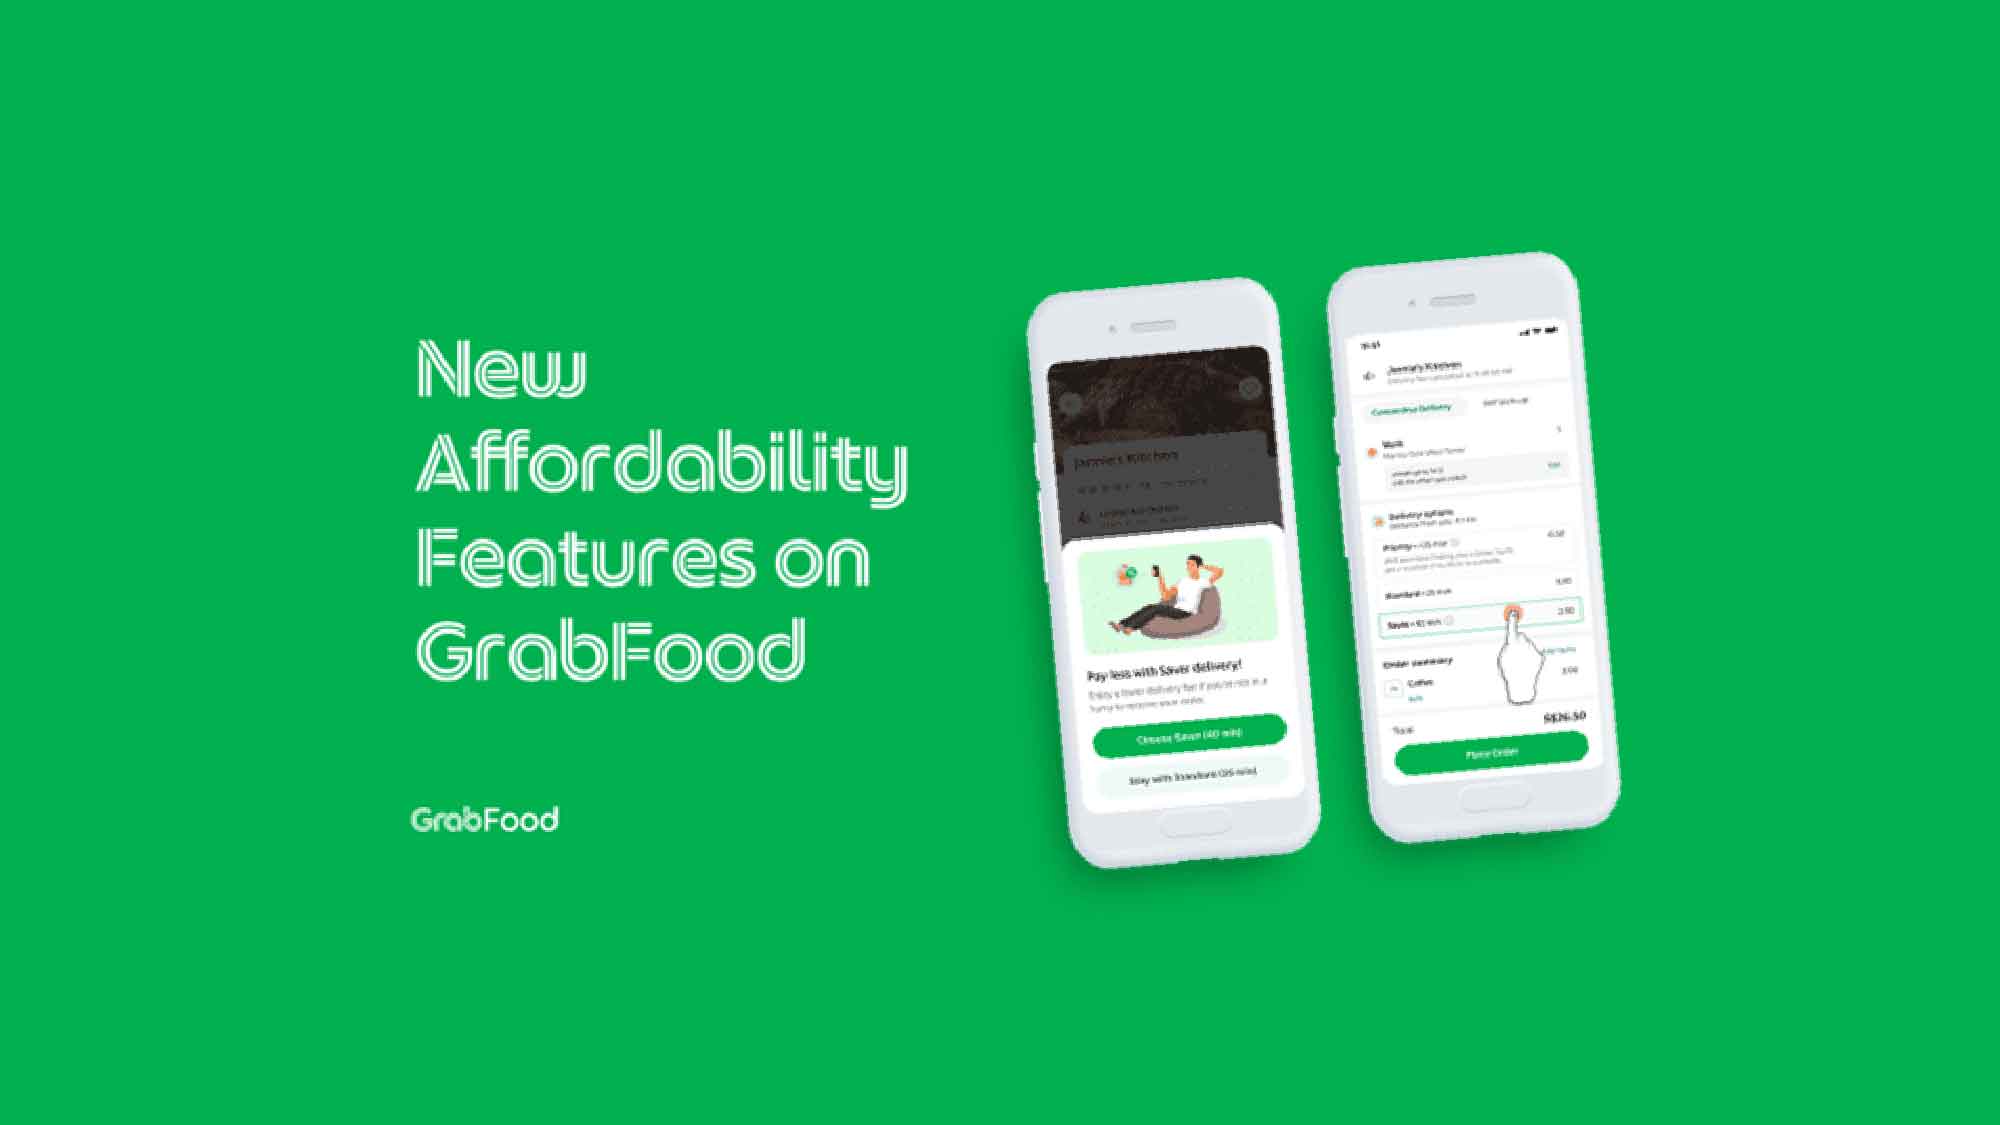 Grab Brings More Affordable Features to Singapore Foodies